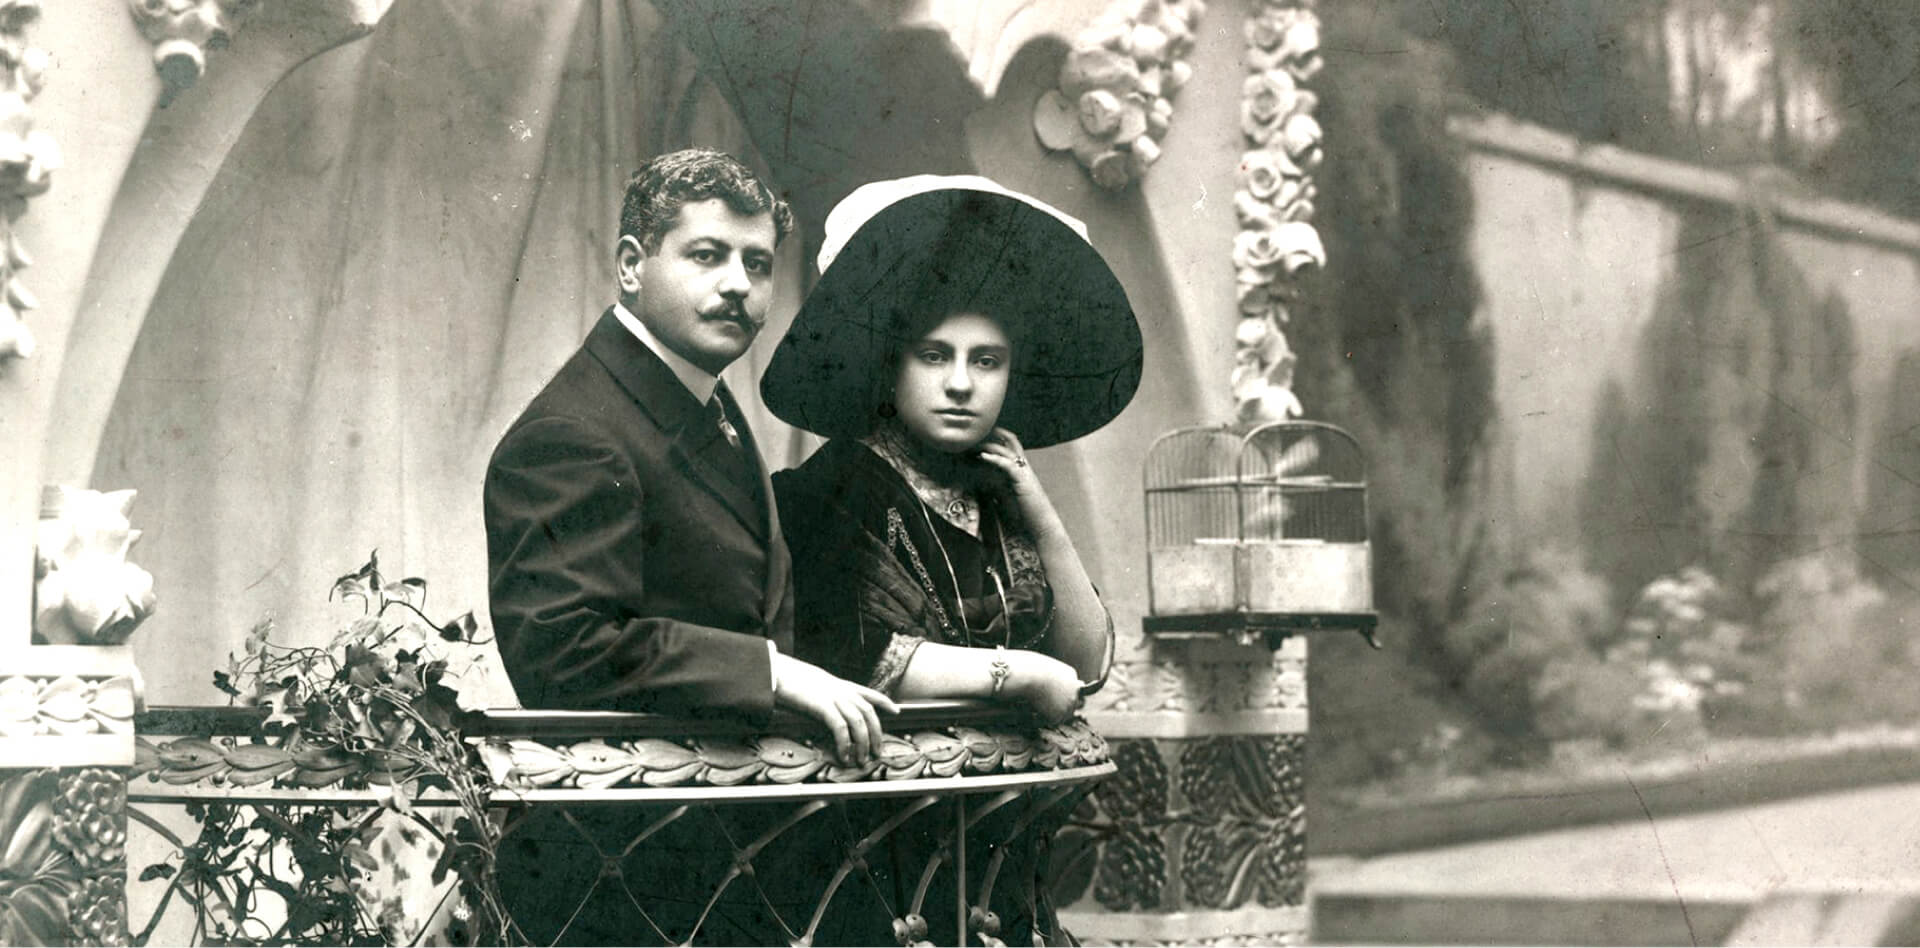 Freixenet’s founders Pedro Ferrer and Dolores Sala Vivé in 1911. Link to through the years.